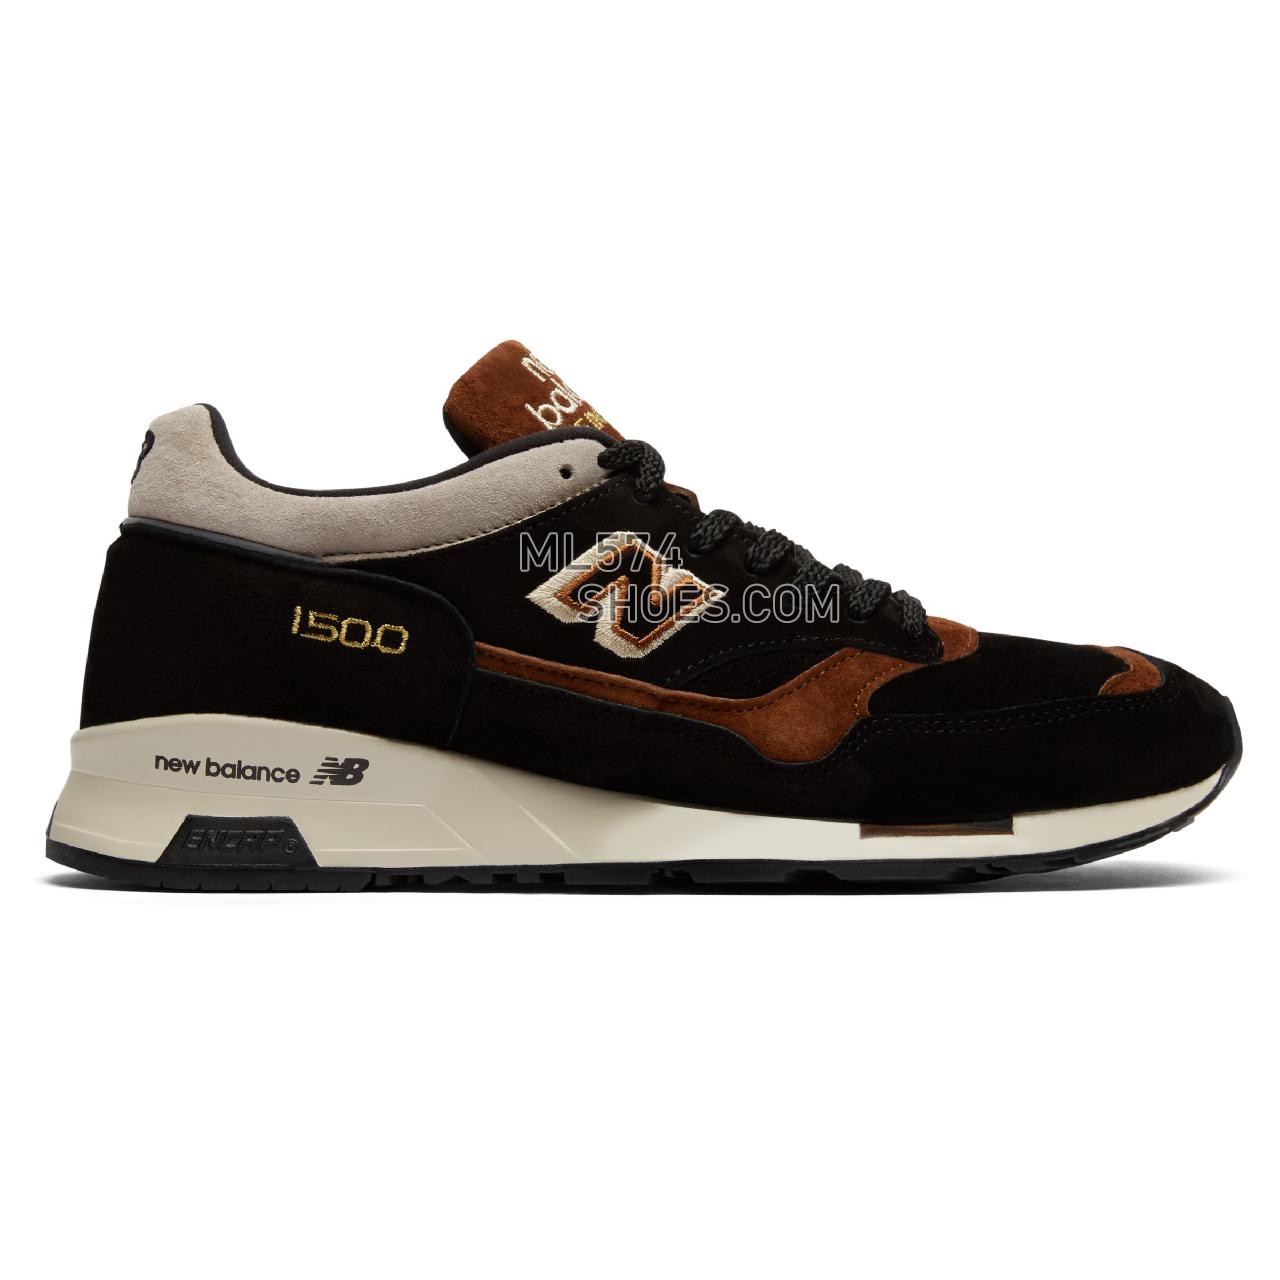 New Balance Made in UK 1500 - Men's Made in USA And UK Sneakers - Black with Brown and Beige - M1500YOR